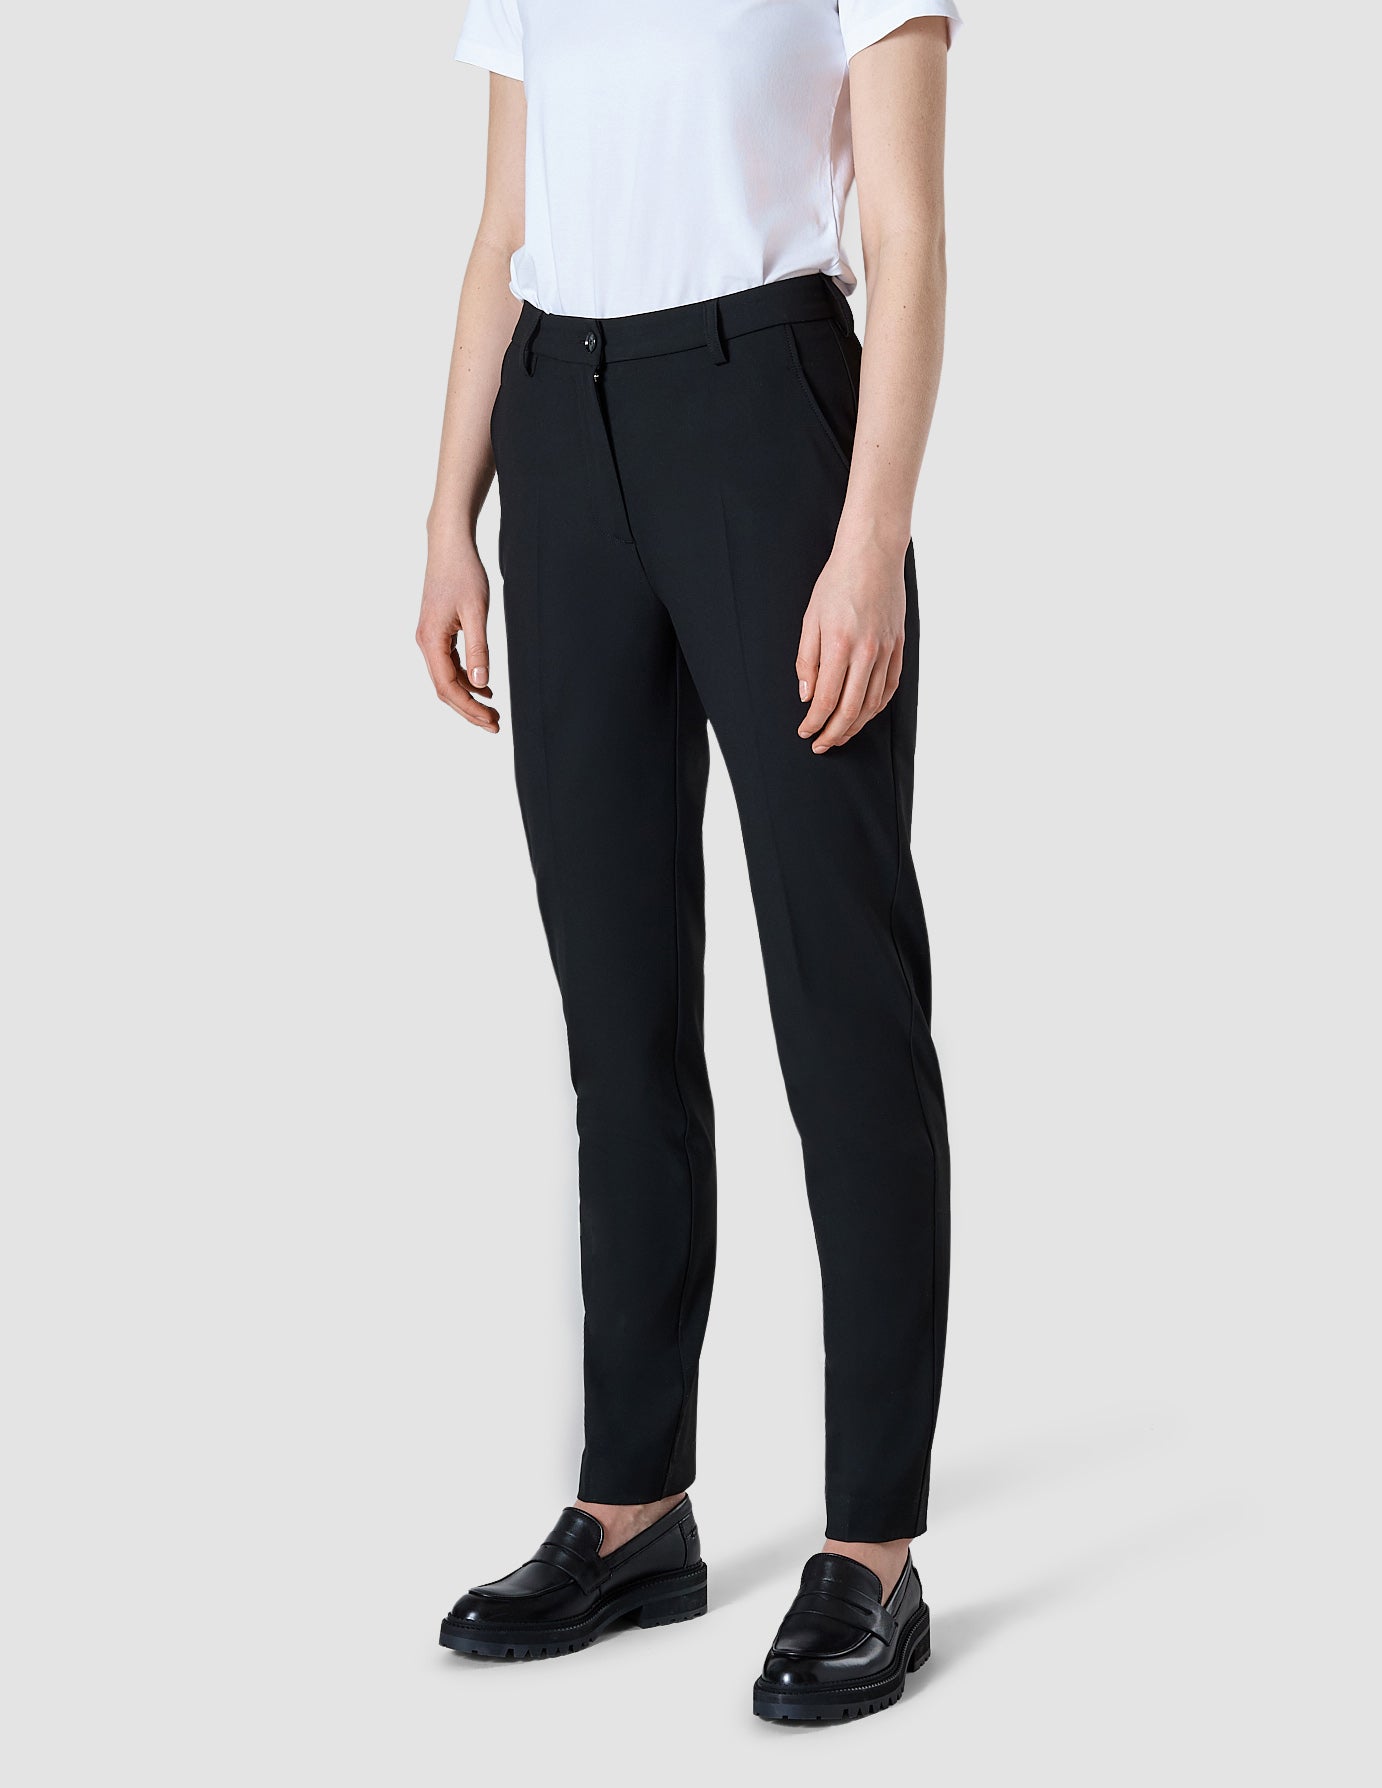 Yours Clothing DARTED WAIST TAPERED - Trousers - blue - Zalando.de